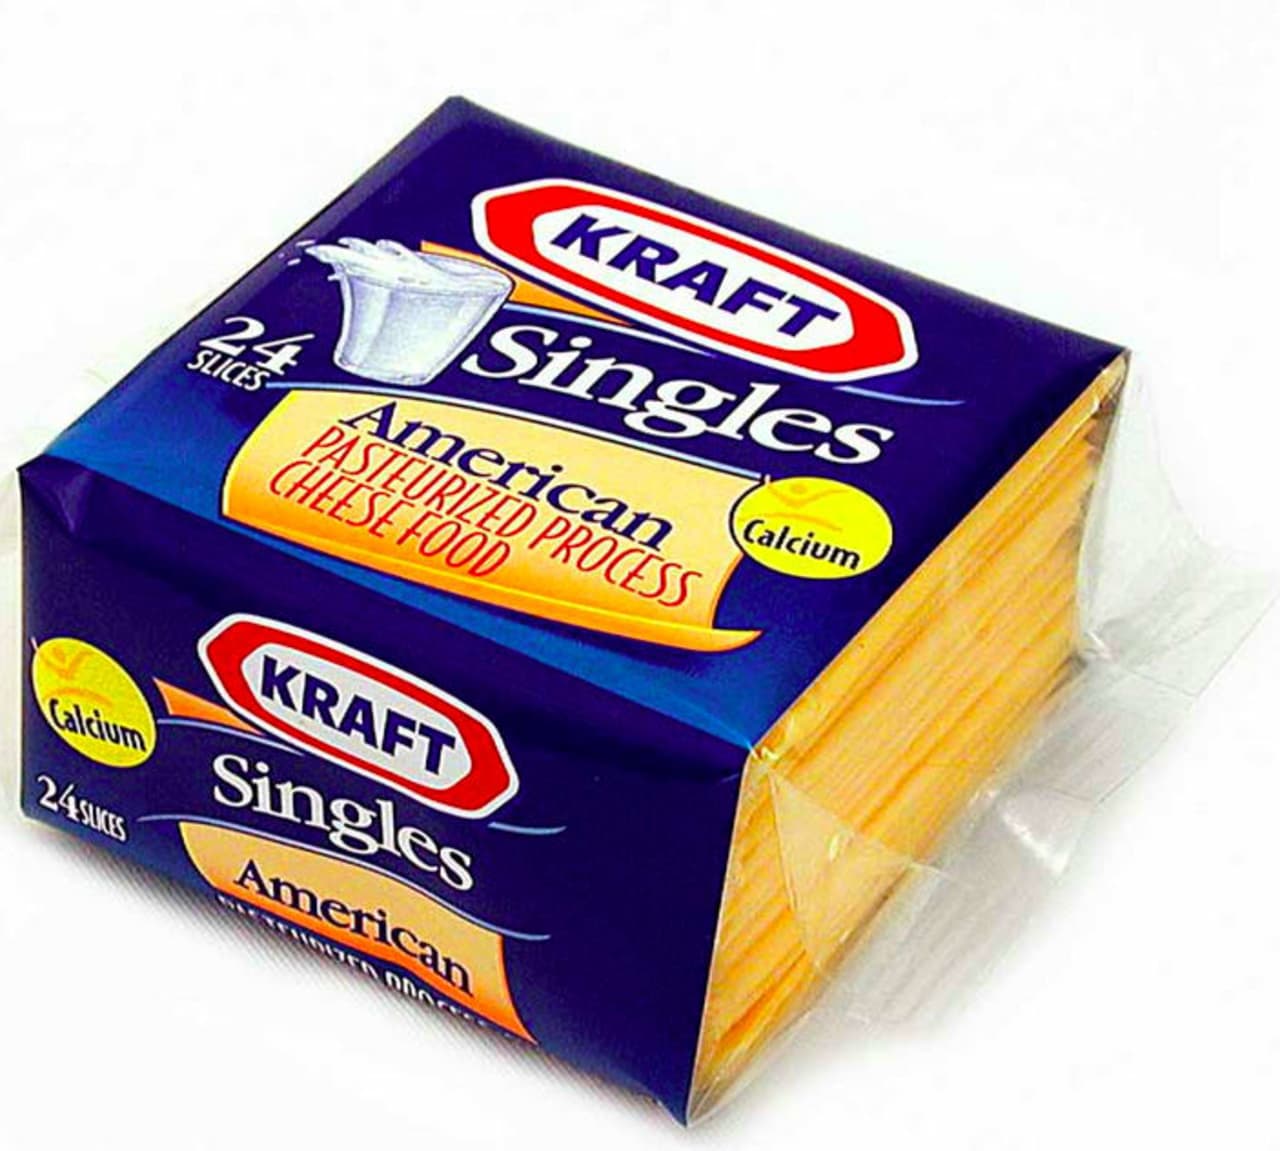 Kraft has voluntarily recalled select American and White American single slices.